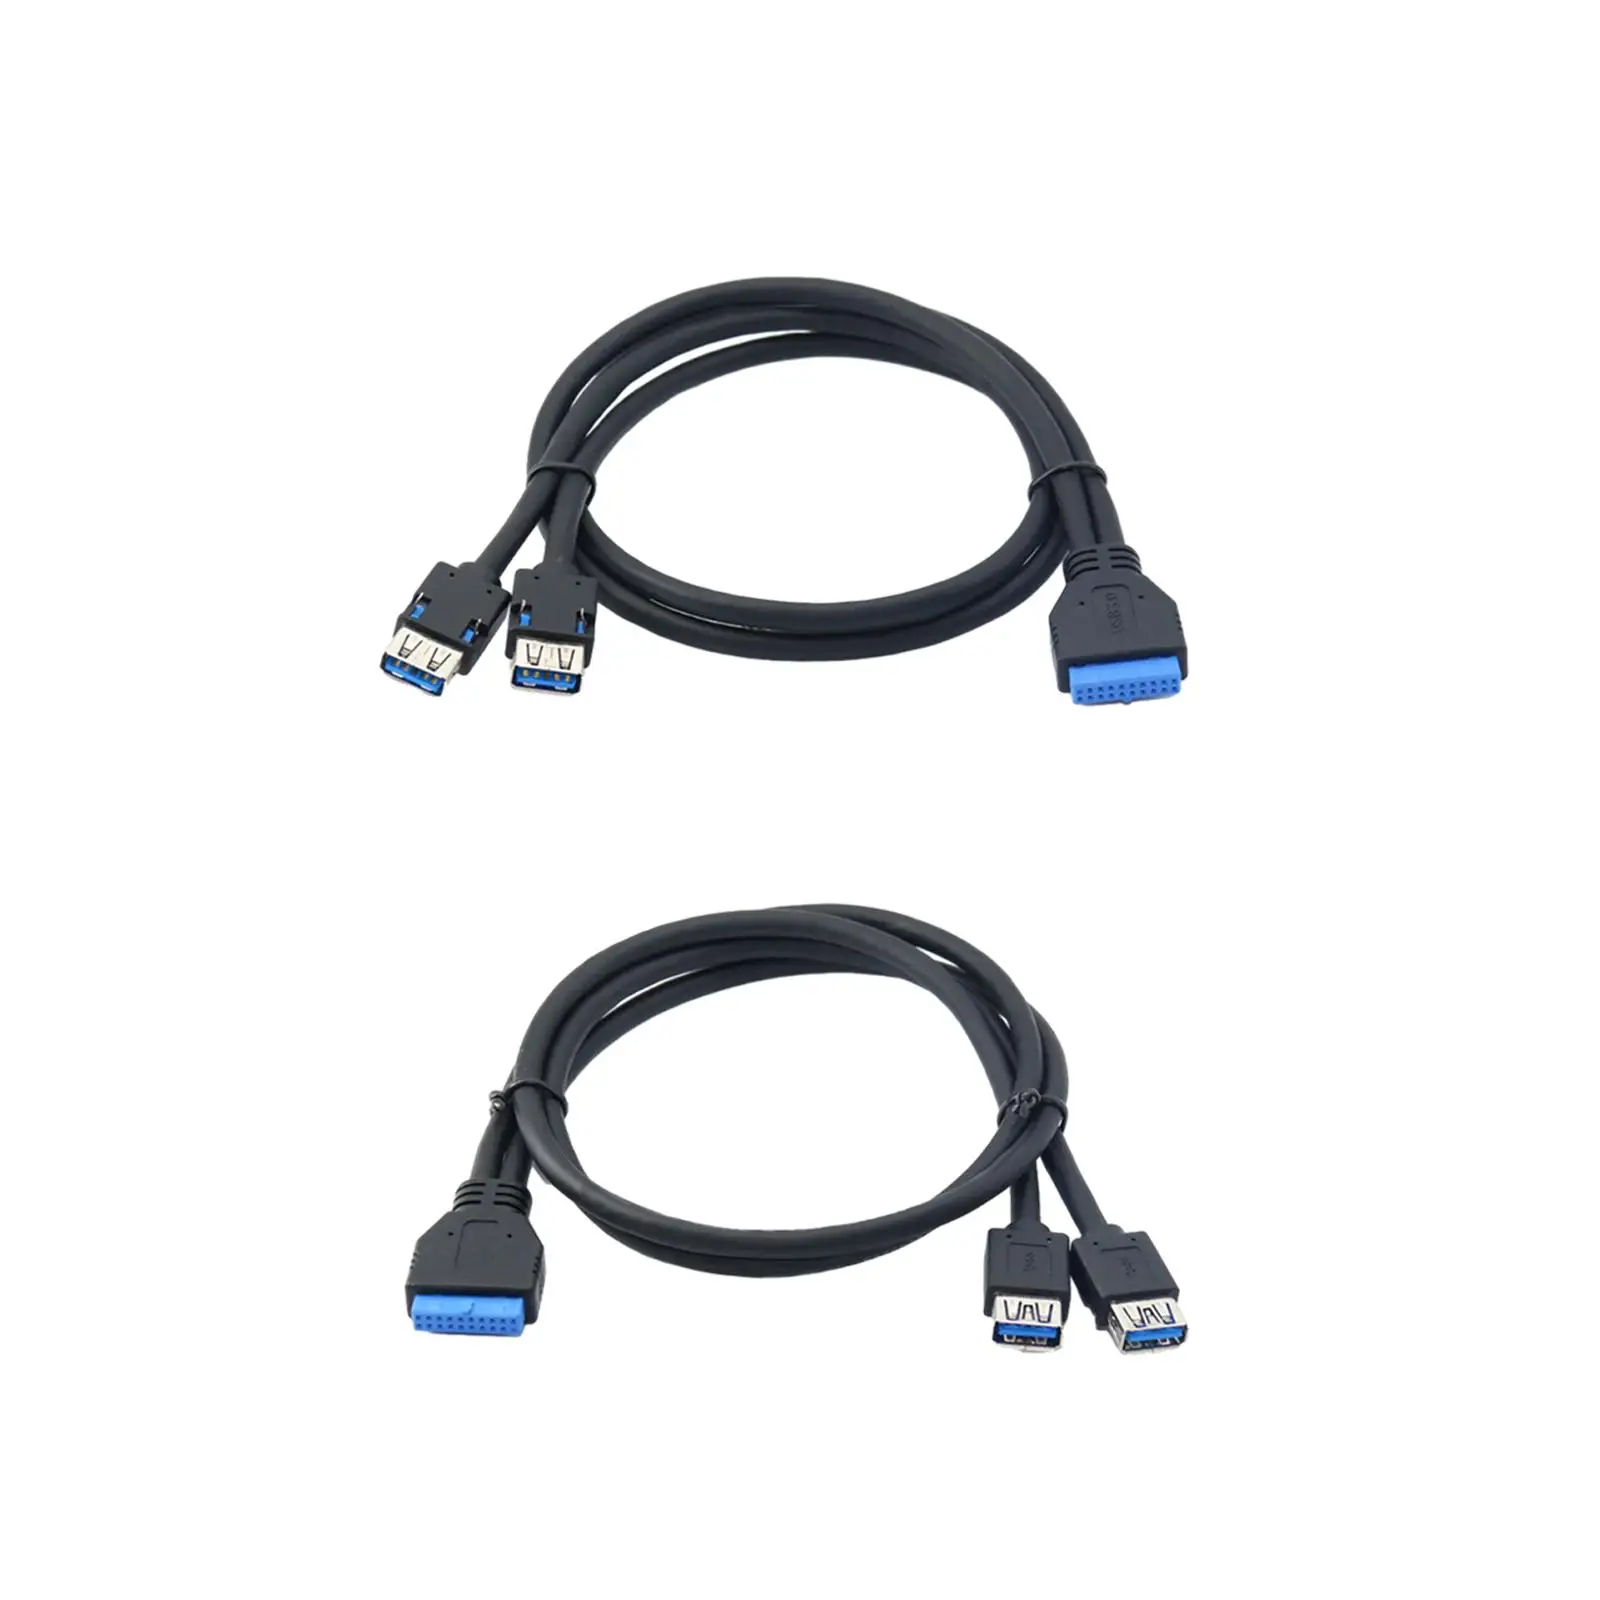 20 Pin USB 3.0 to 2 Ports Cable Internal Simple Computer Networking Switches